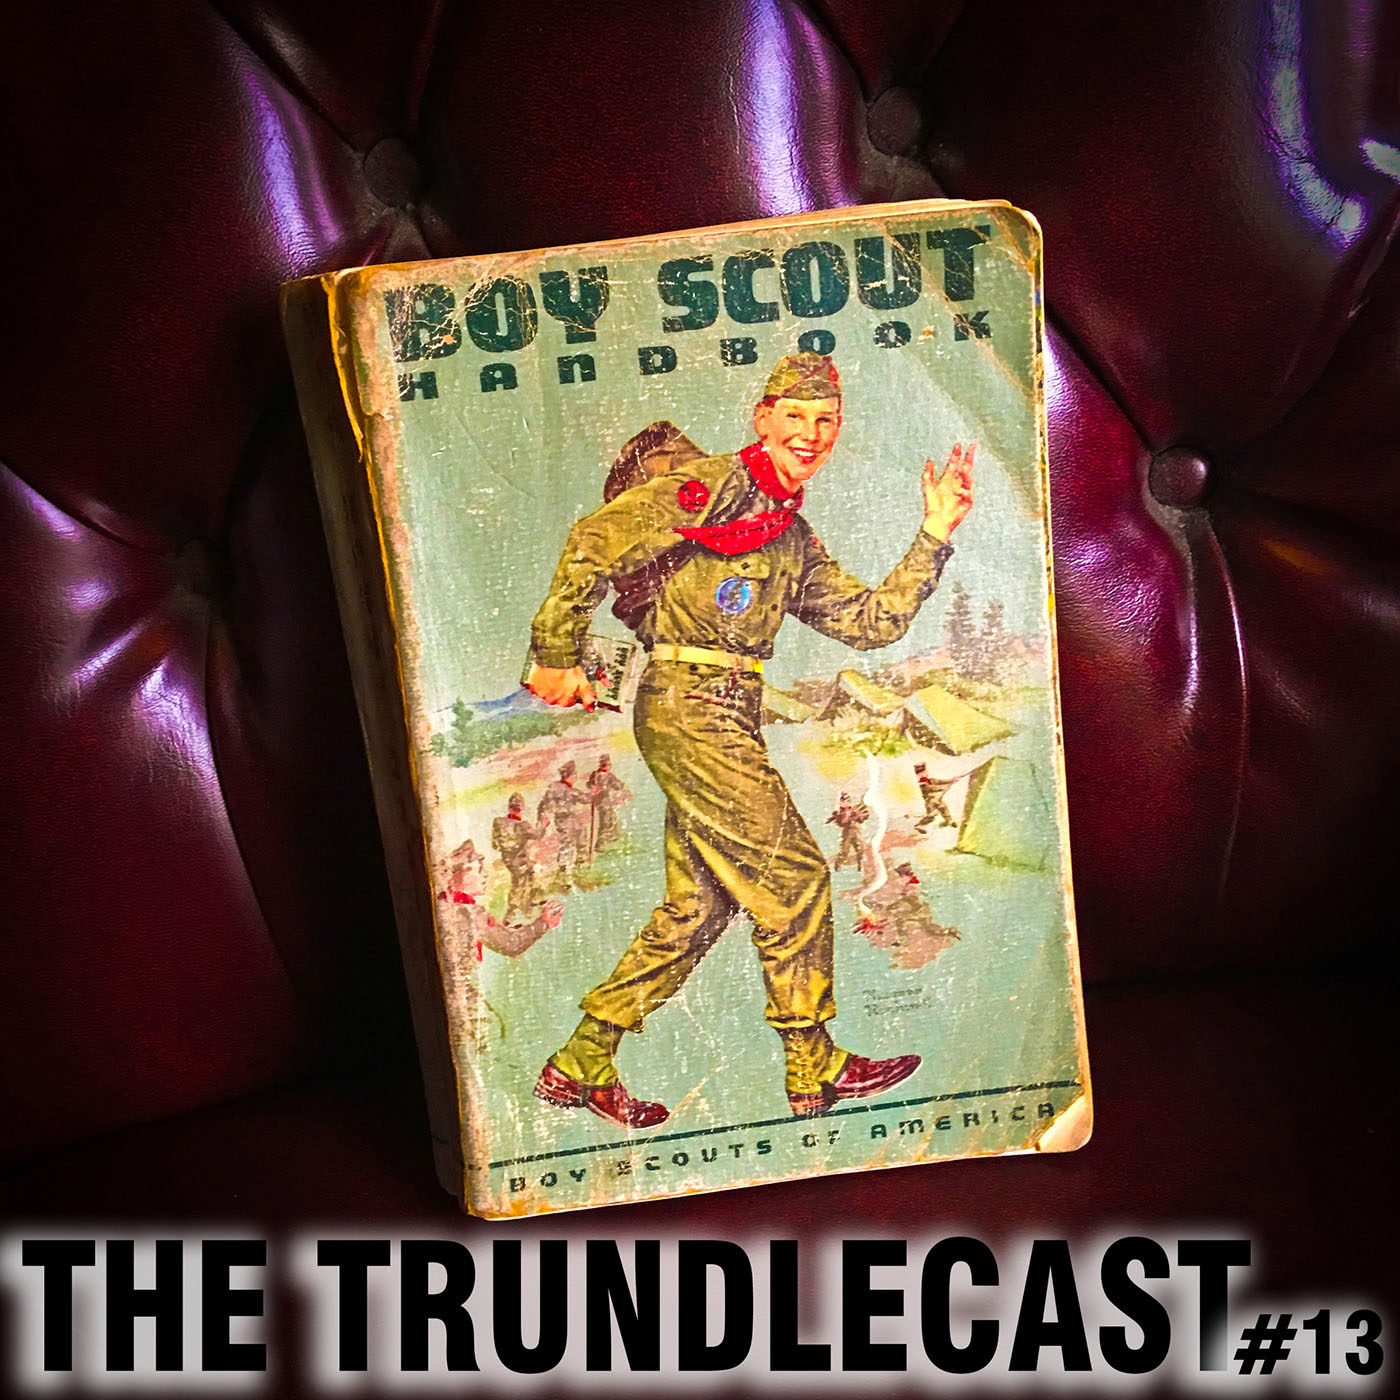 The 13th Trundlecast!